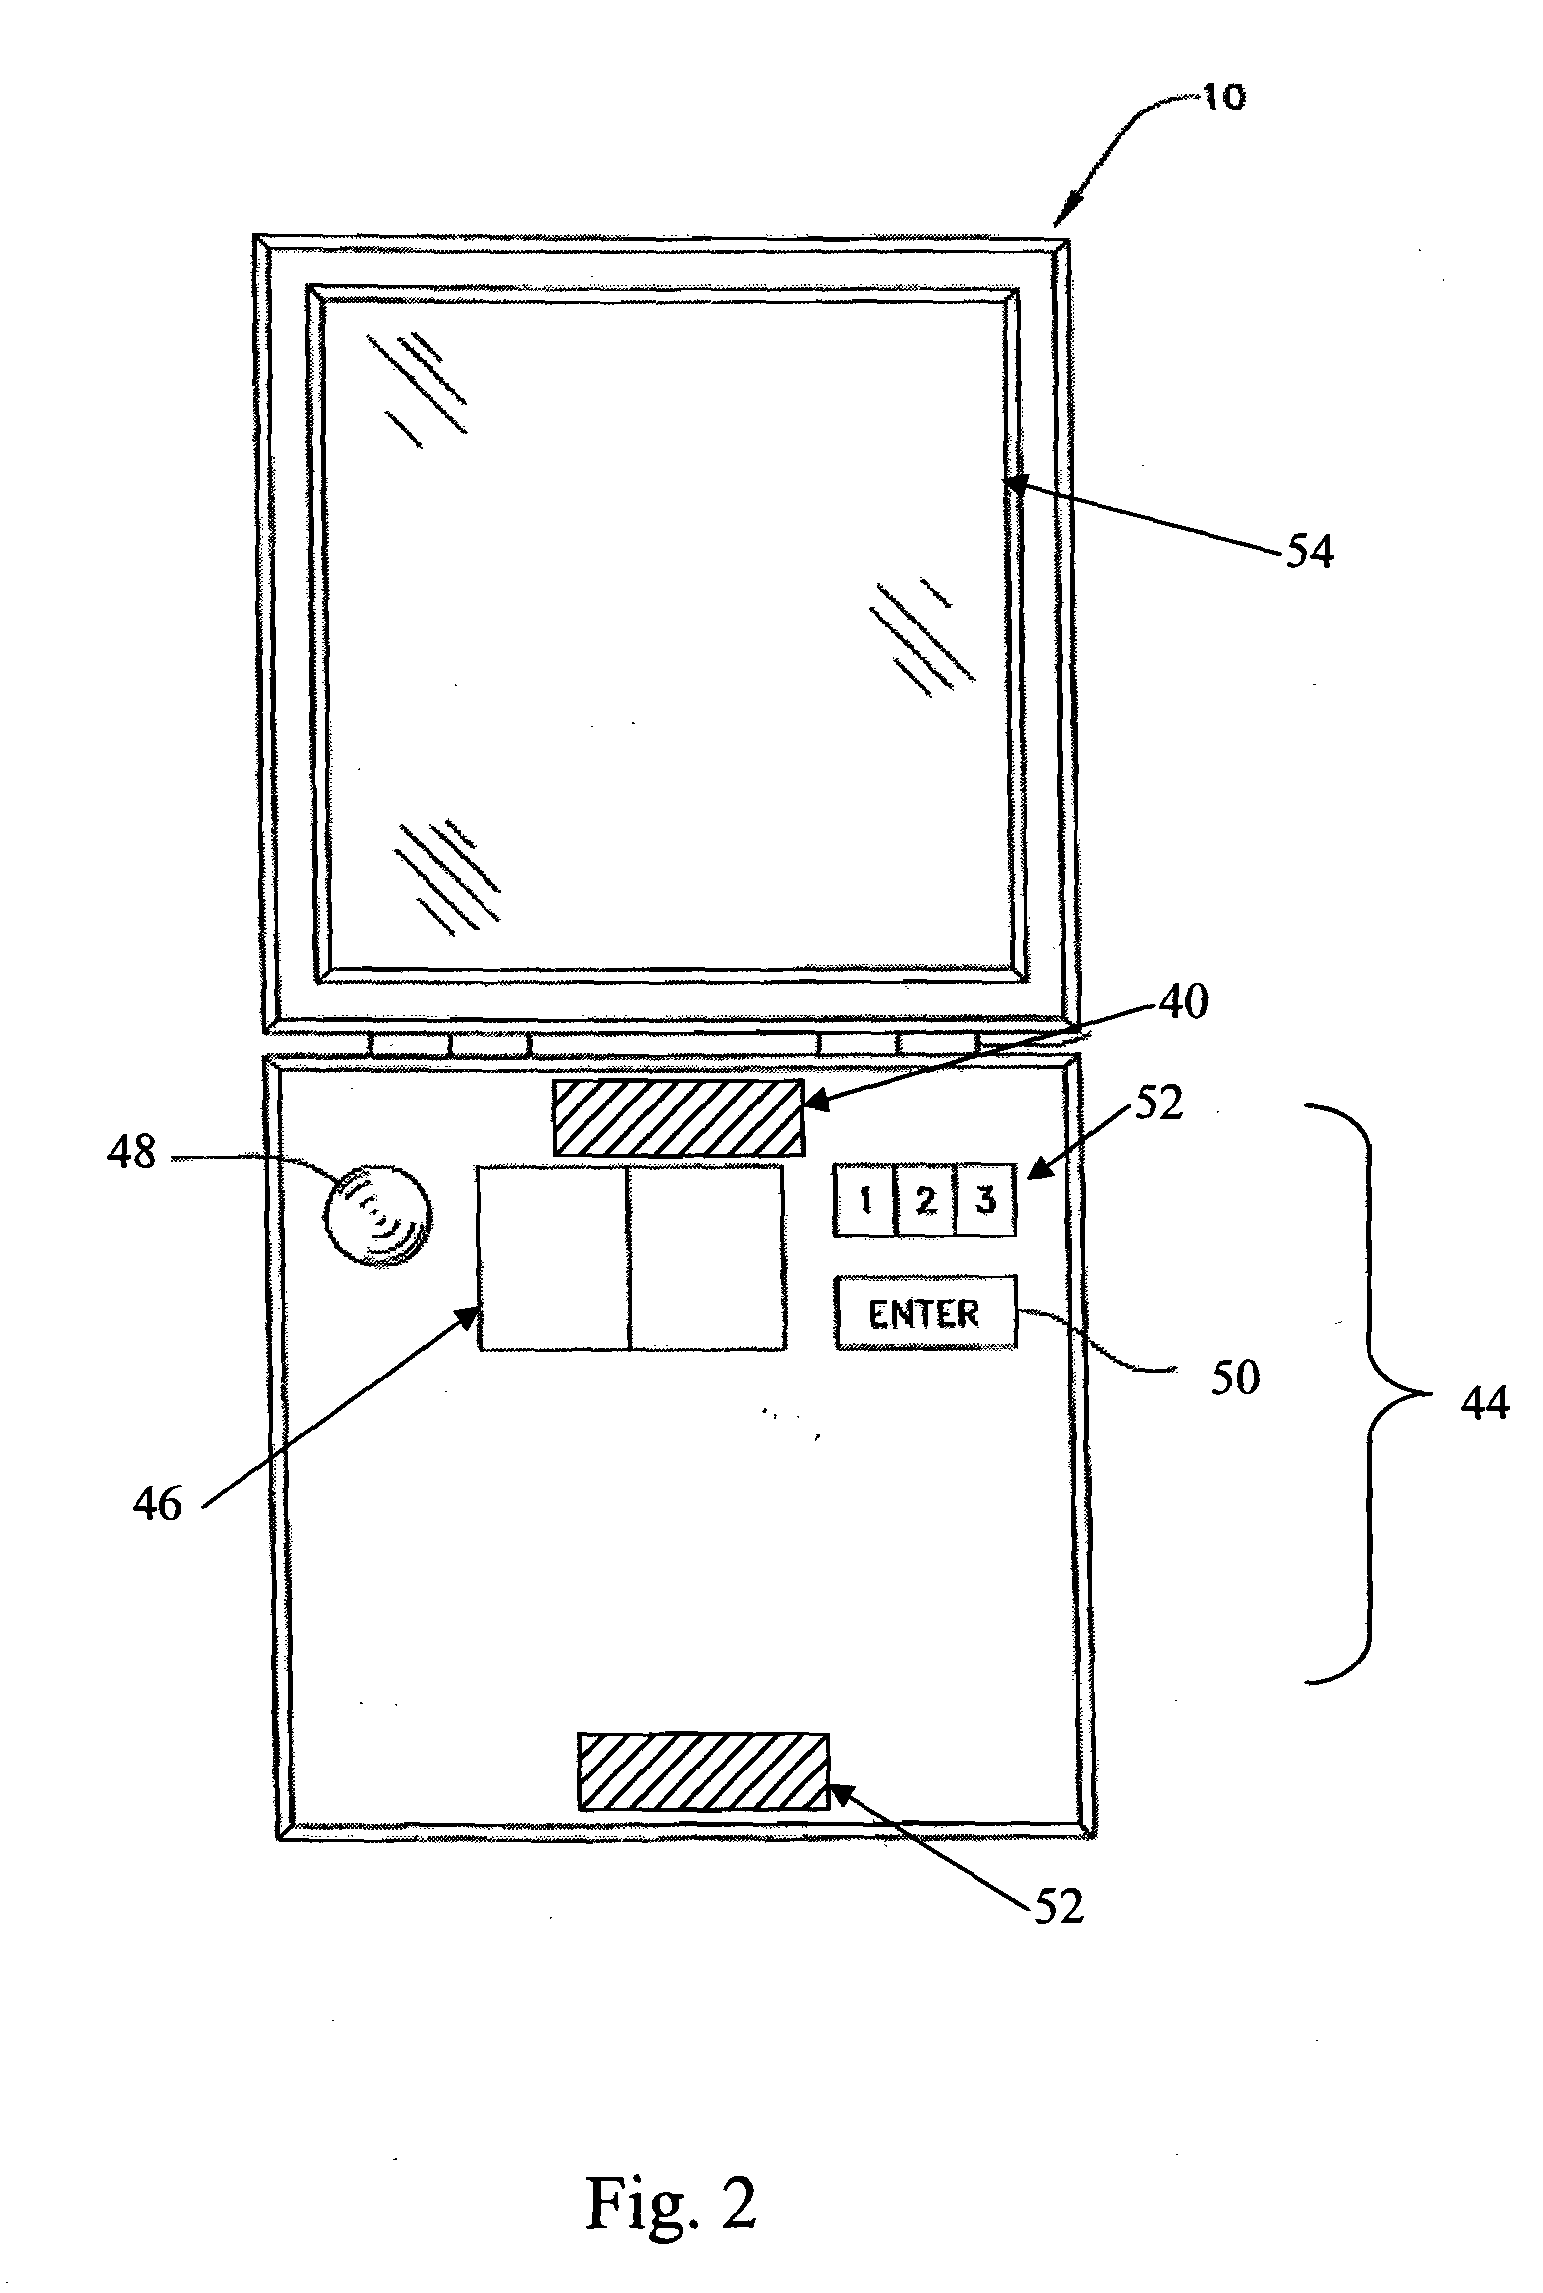 Method and System for Interactive Cognitive Testing